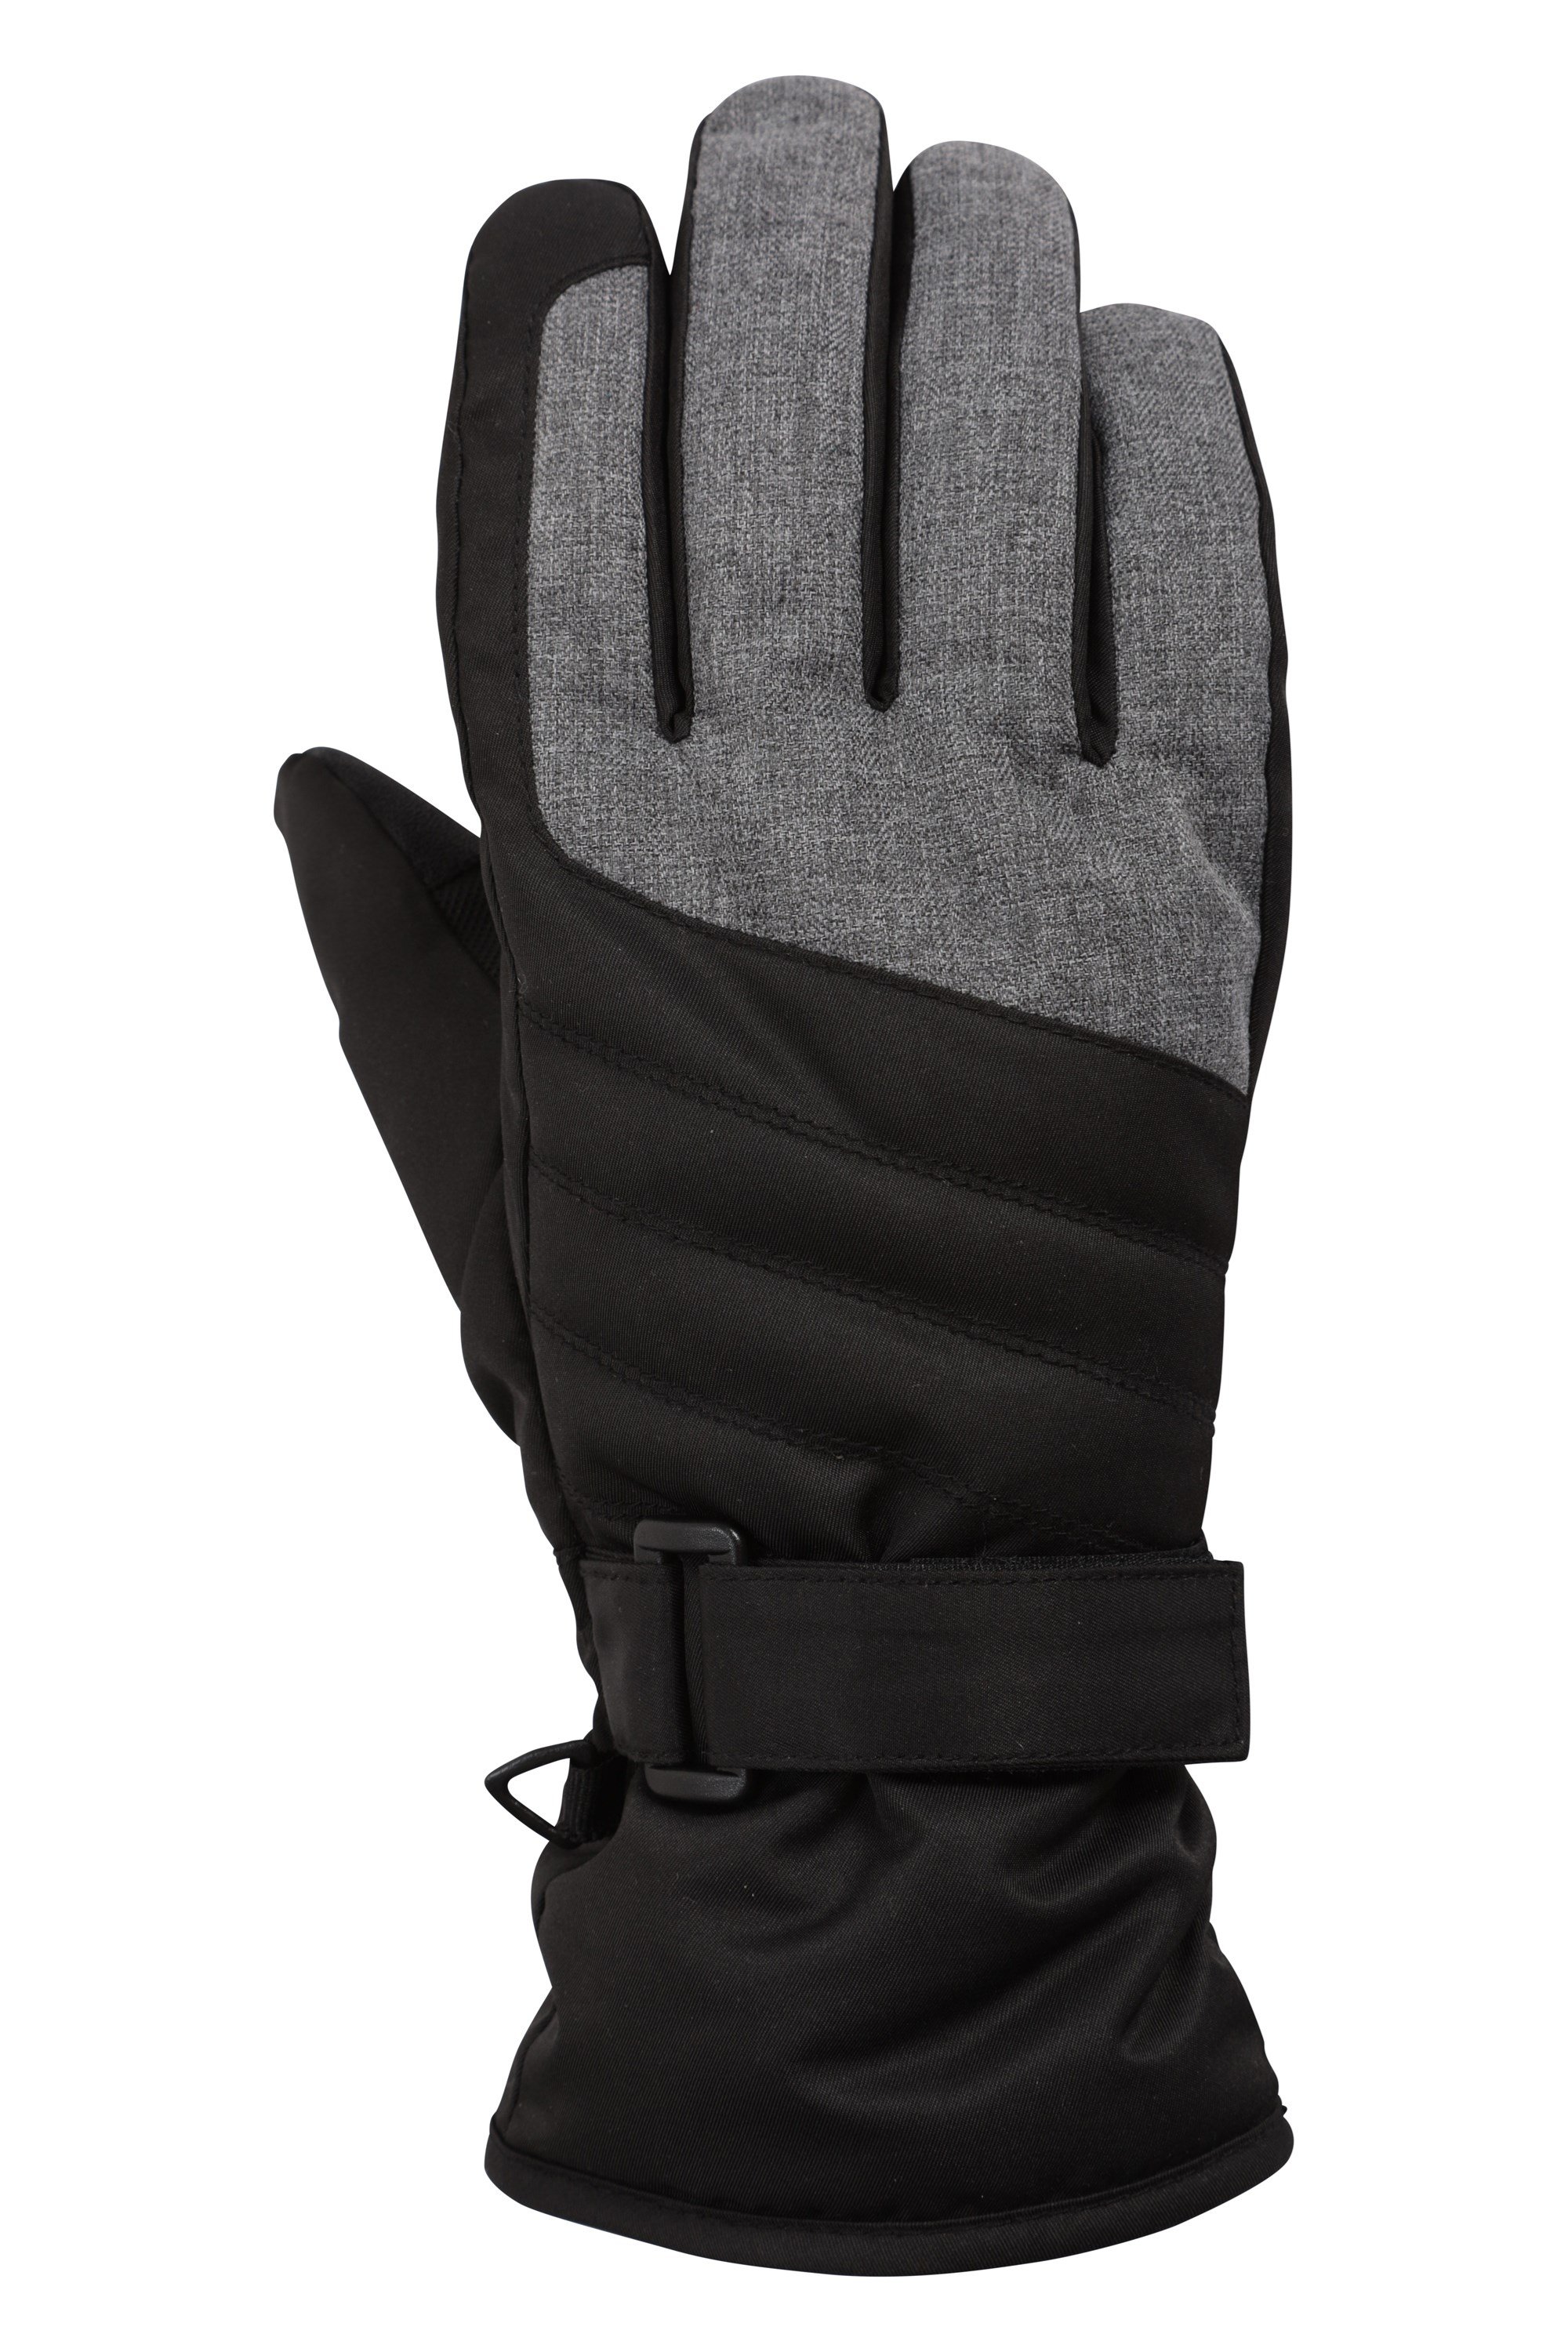 Mountain Warehouse Mountain Warehouse Womens Grace Glove Ladies Knitted Warm Breathable Gloves 5052776748001 